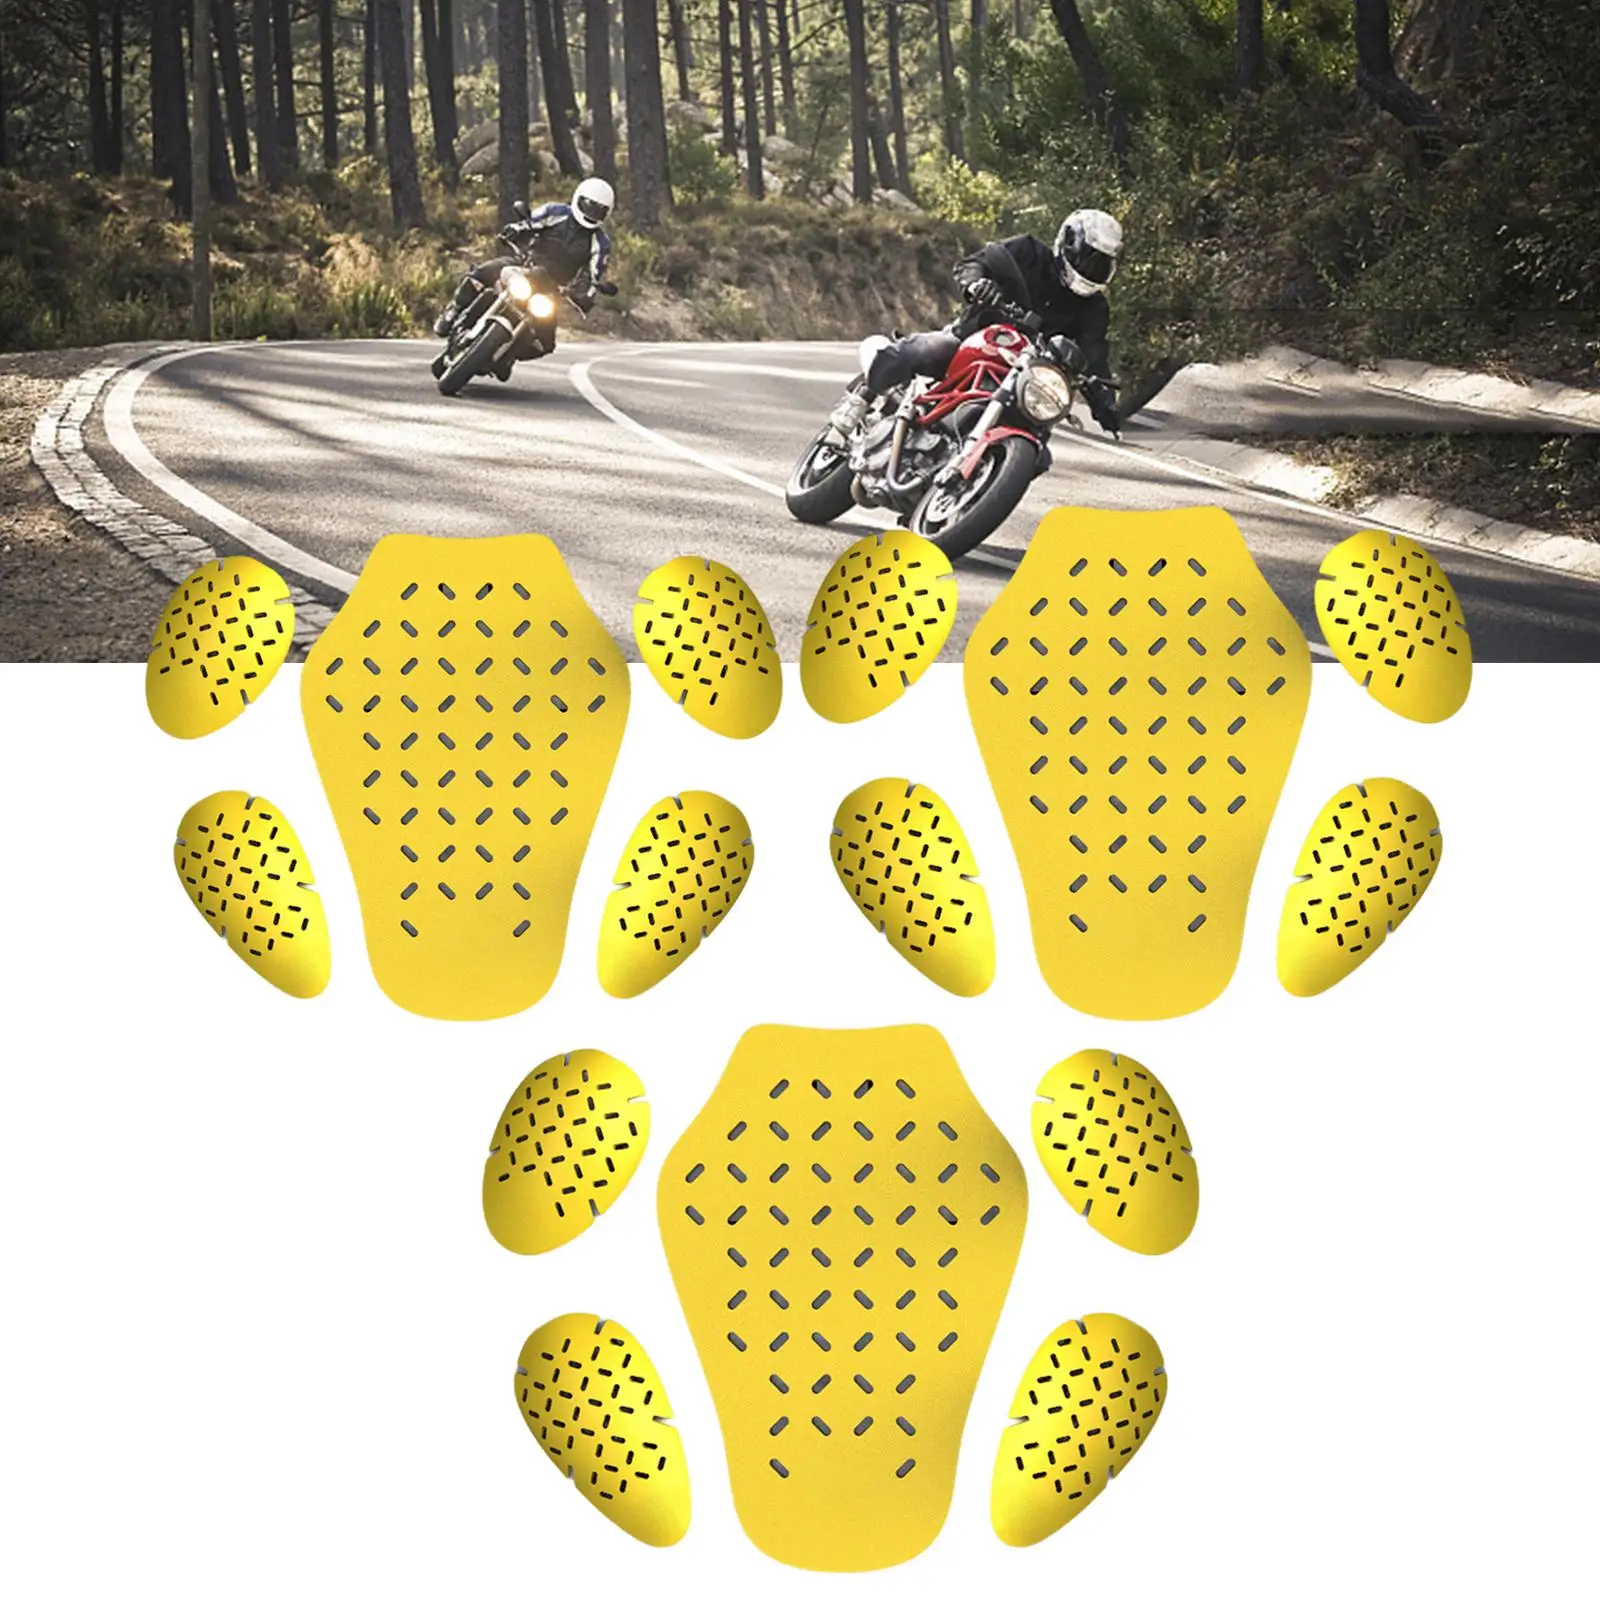 5x Motorbike Insert Armor Pads Lightweight Motorcycle Protector Insert for Motorcycle Street Biker Jackets Skating Cycling